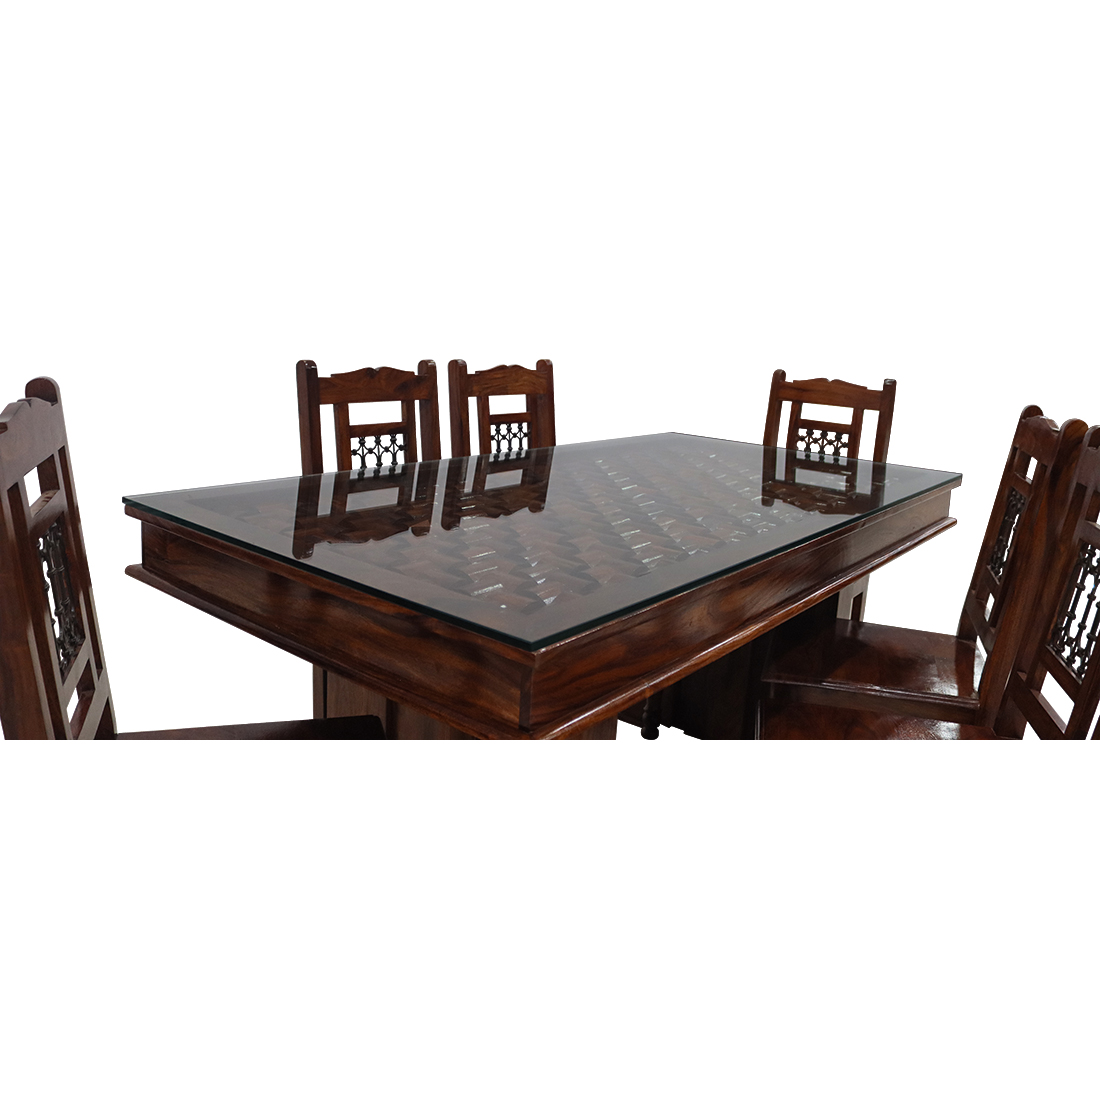 Shekhawati Decor Solid Sheesham Indian Rosewood 6 Seater Dining Table Set with 6 Chairs